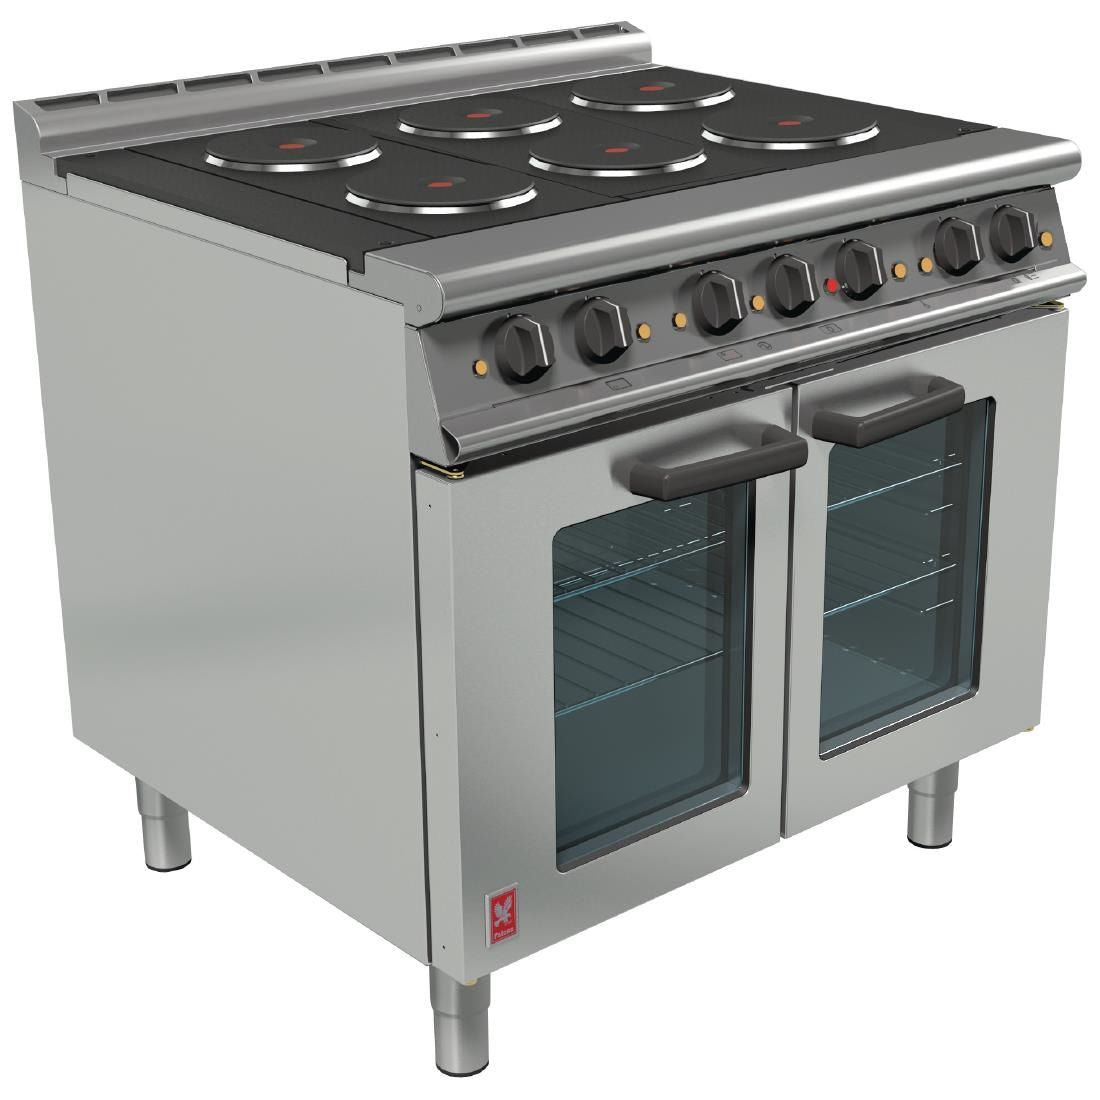 Falcon Dominator Plus 6 Hotplate Oven Range with Fan Assisted Oven E3101 POTC JD Catering Equipment Solutions Ltd